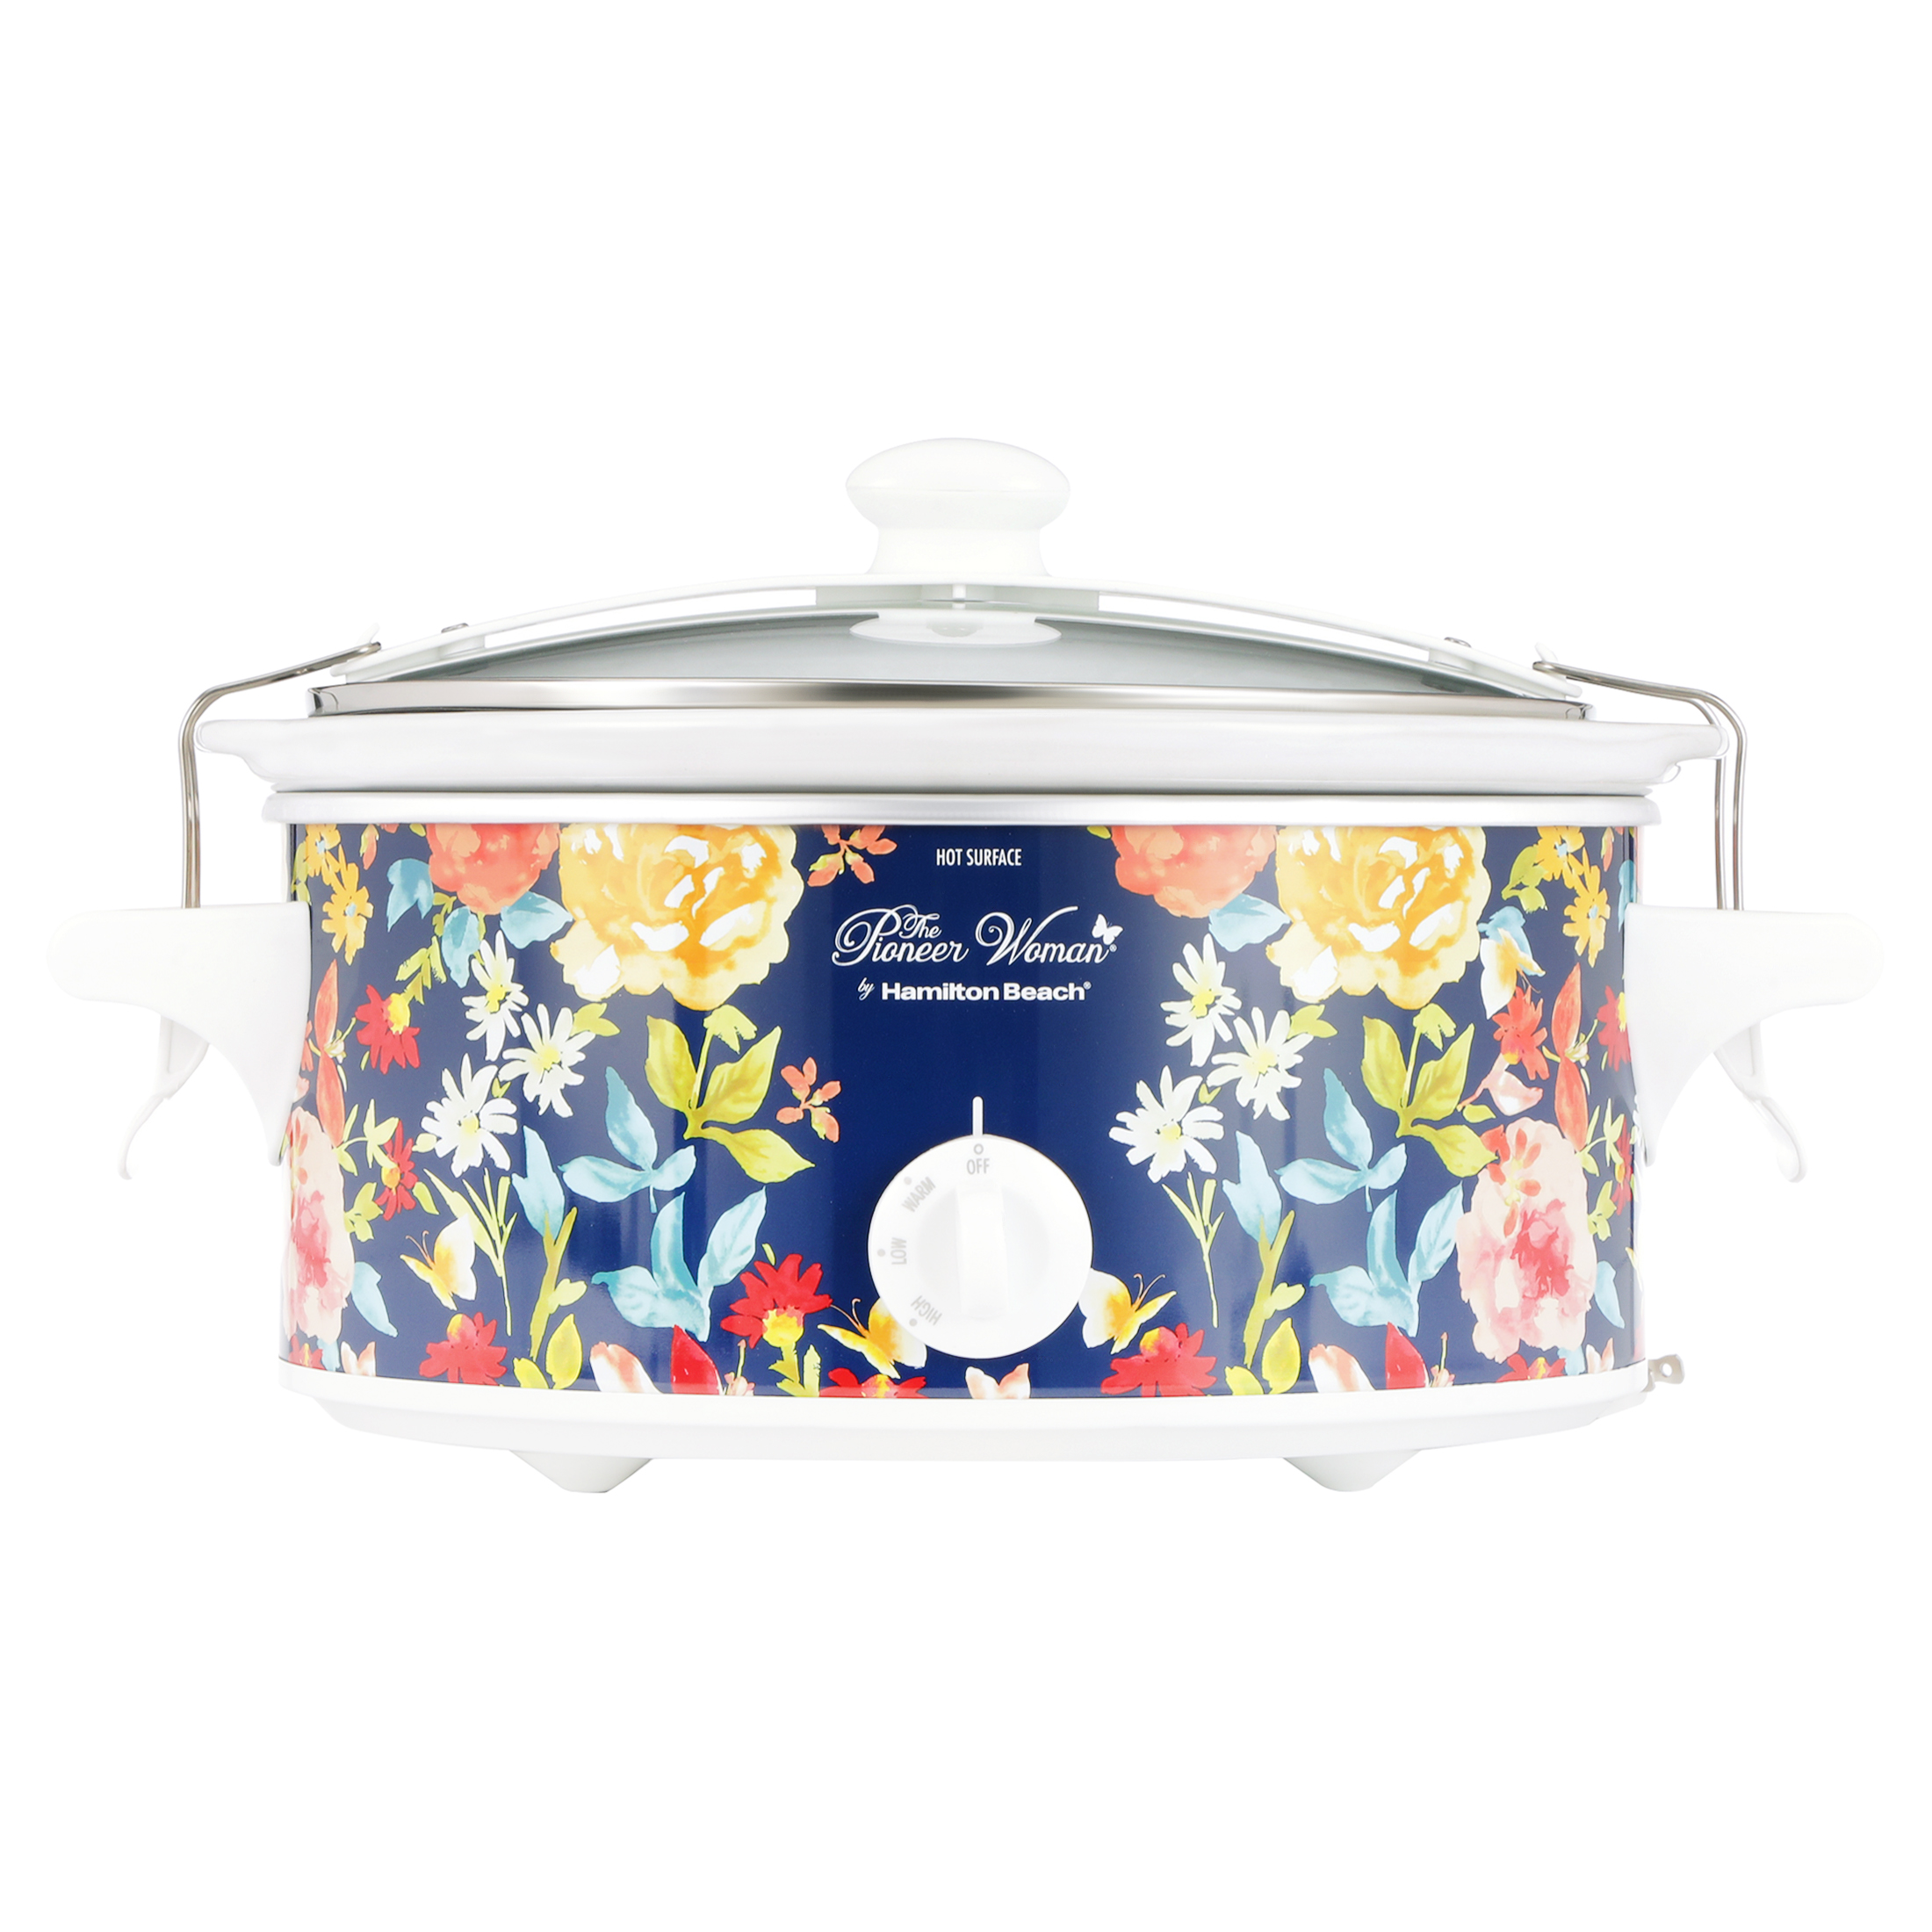 Pioneer Woman 6 Quart Portable Slow Cooker Fiona Floral | Model# 33066 By Hamilton Beach - image 5 of 12